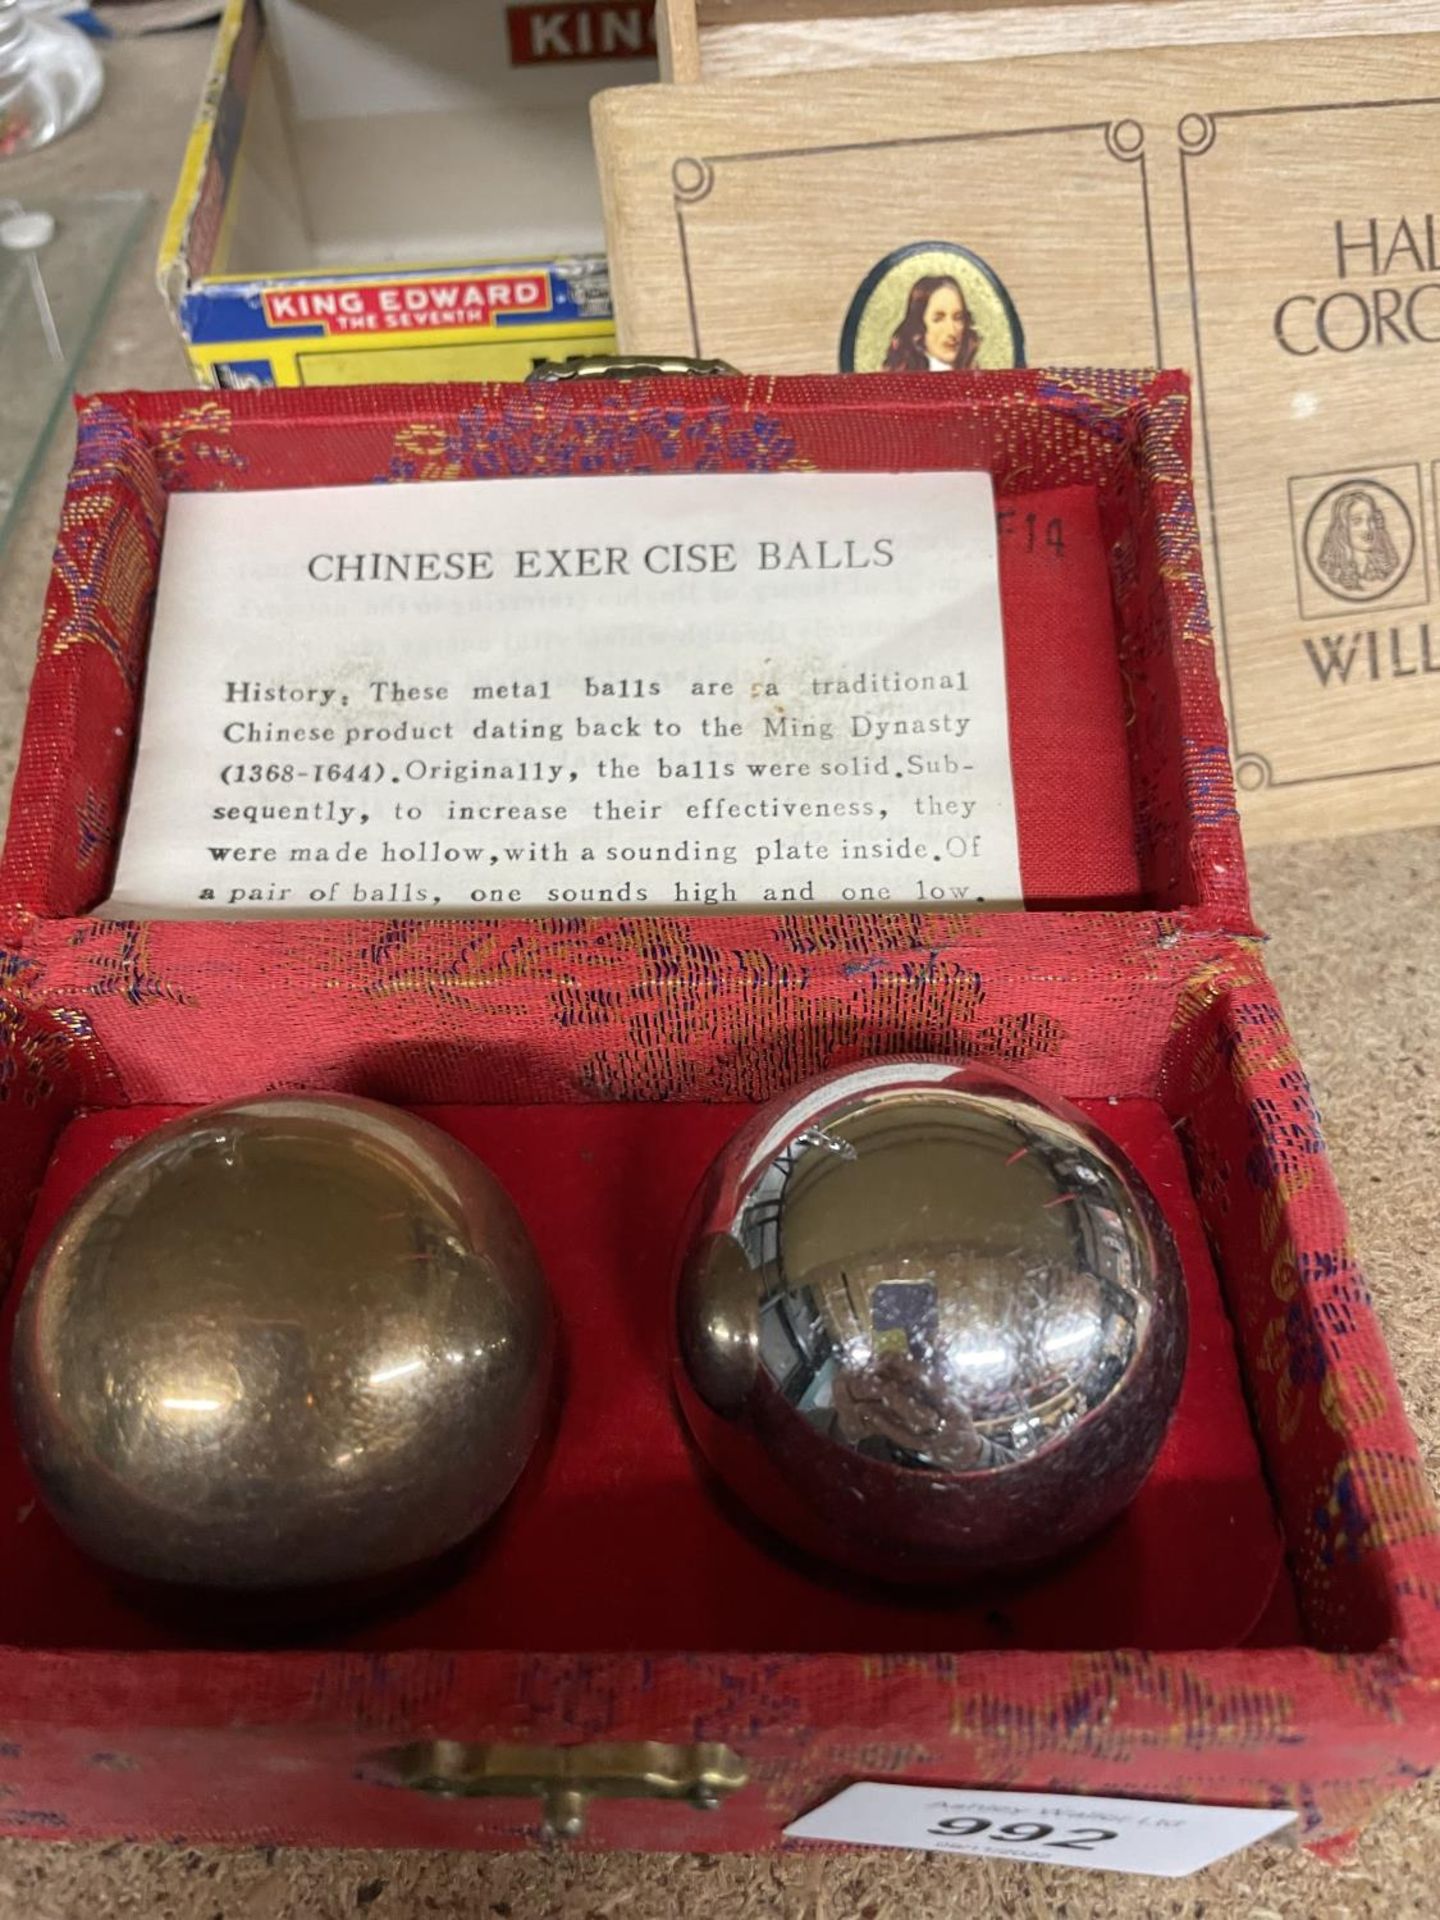 A GLASS CHESS SET WITH BOX, CHINESE EXERCISE BOWLS, WOODEN BOX, GALLILEO THERMOMETER, VINTAGE KING - Image 7 of 12